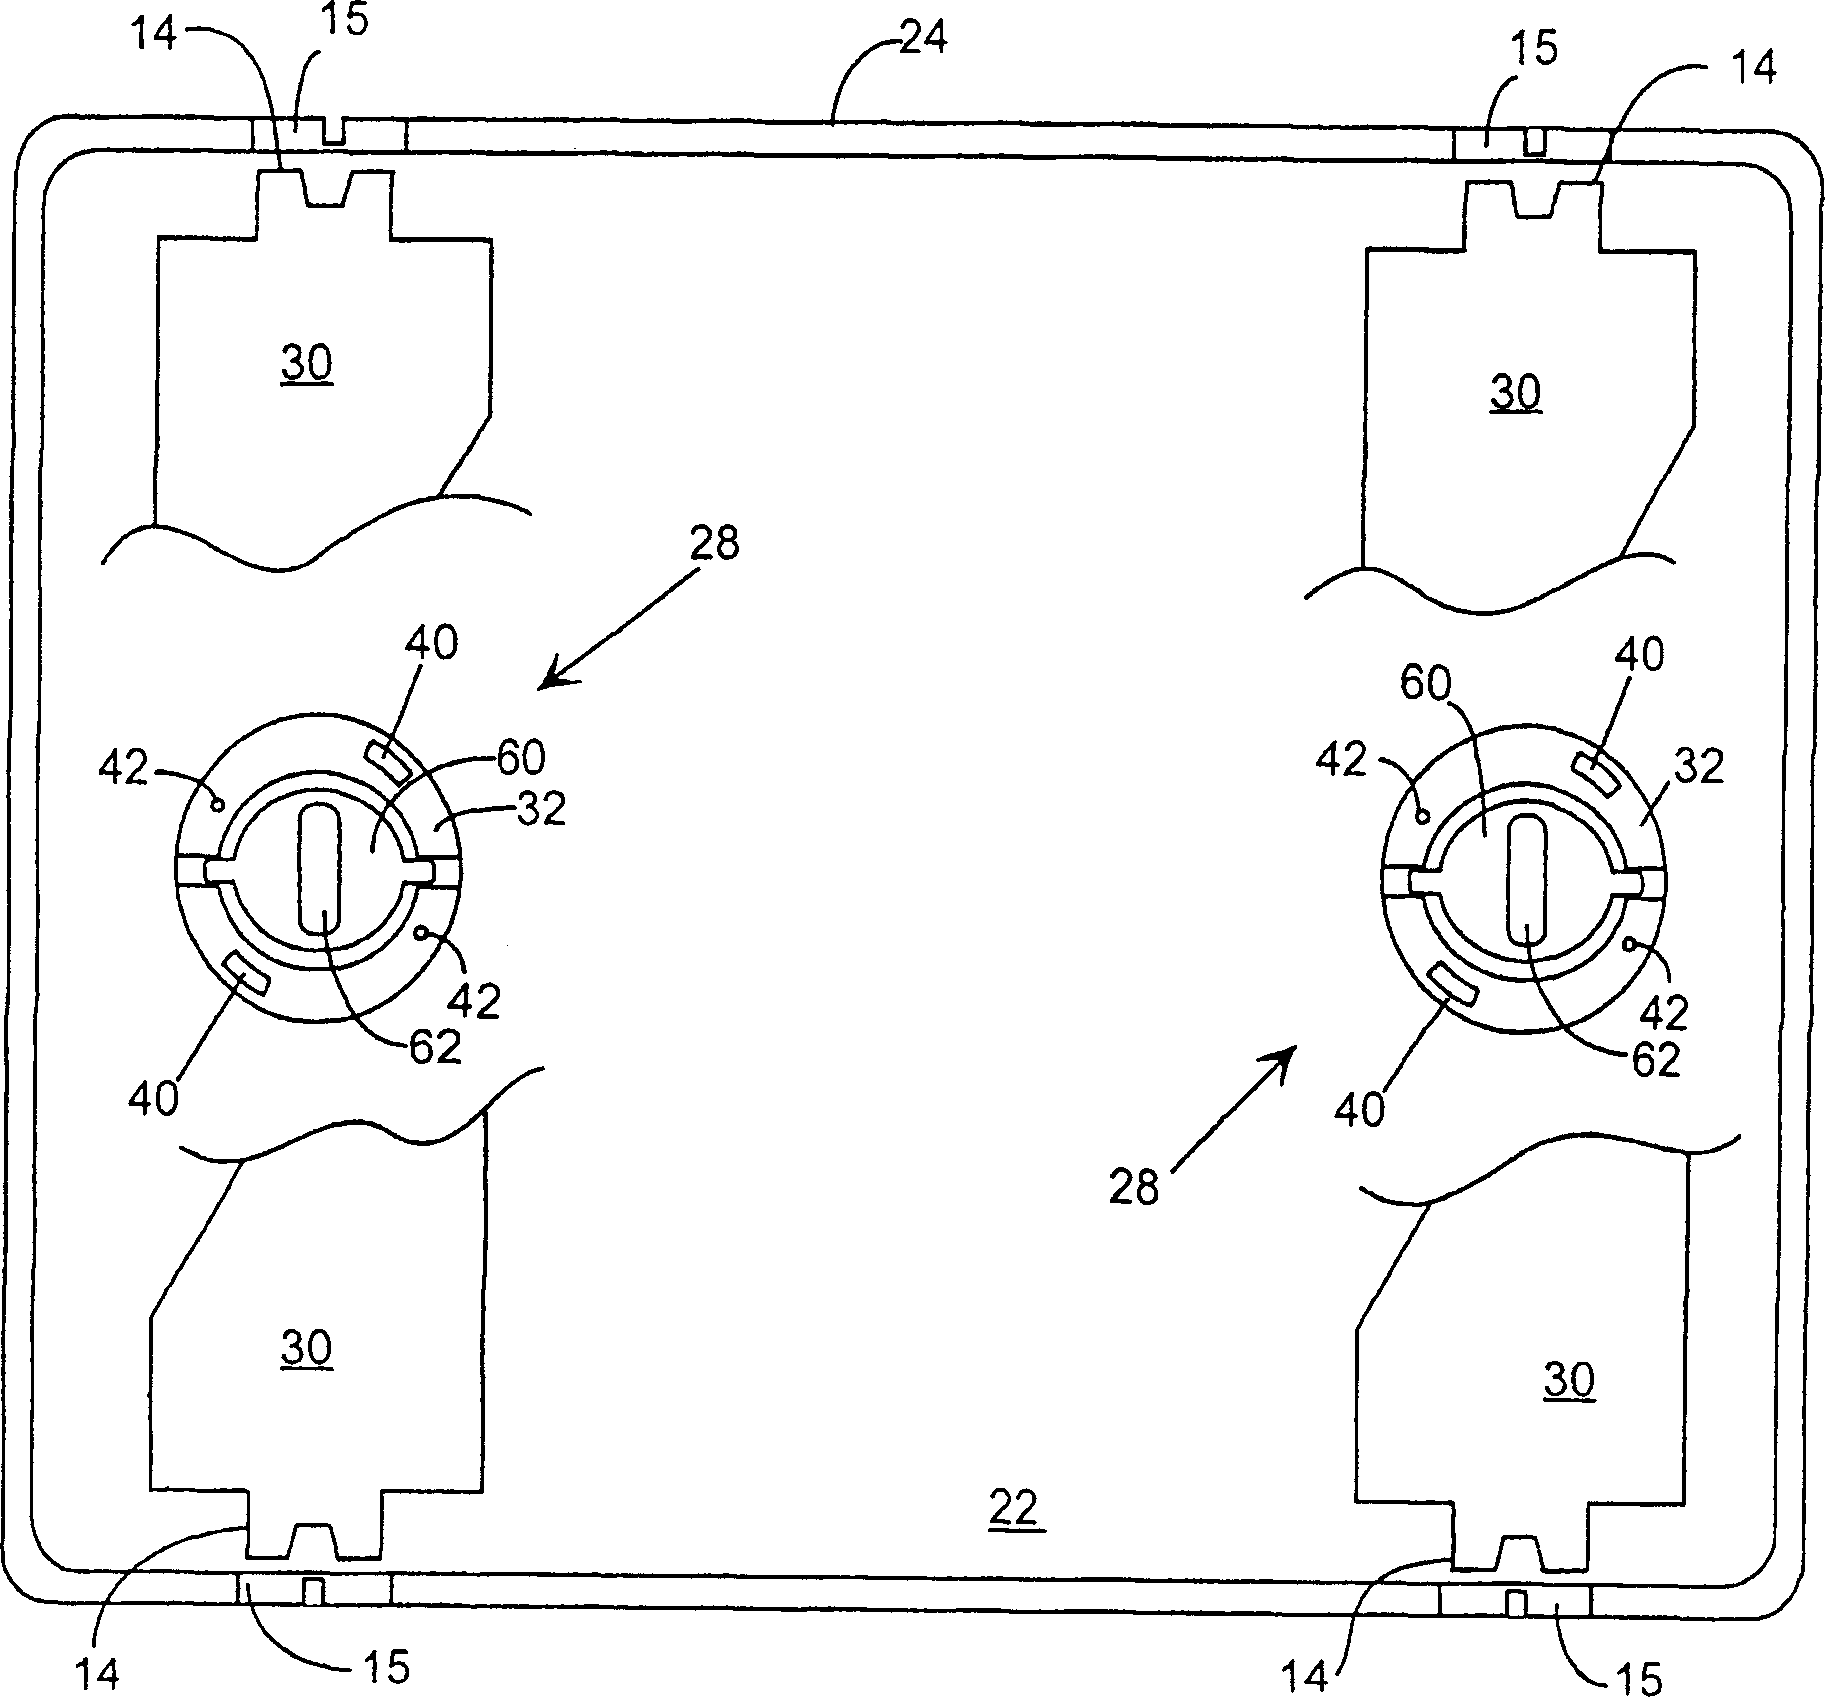 Laterally floating latch hub assembly